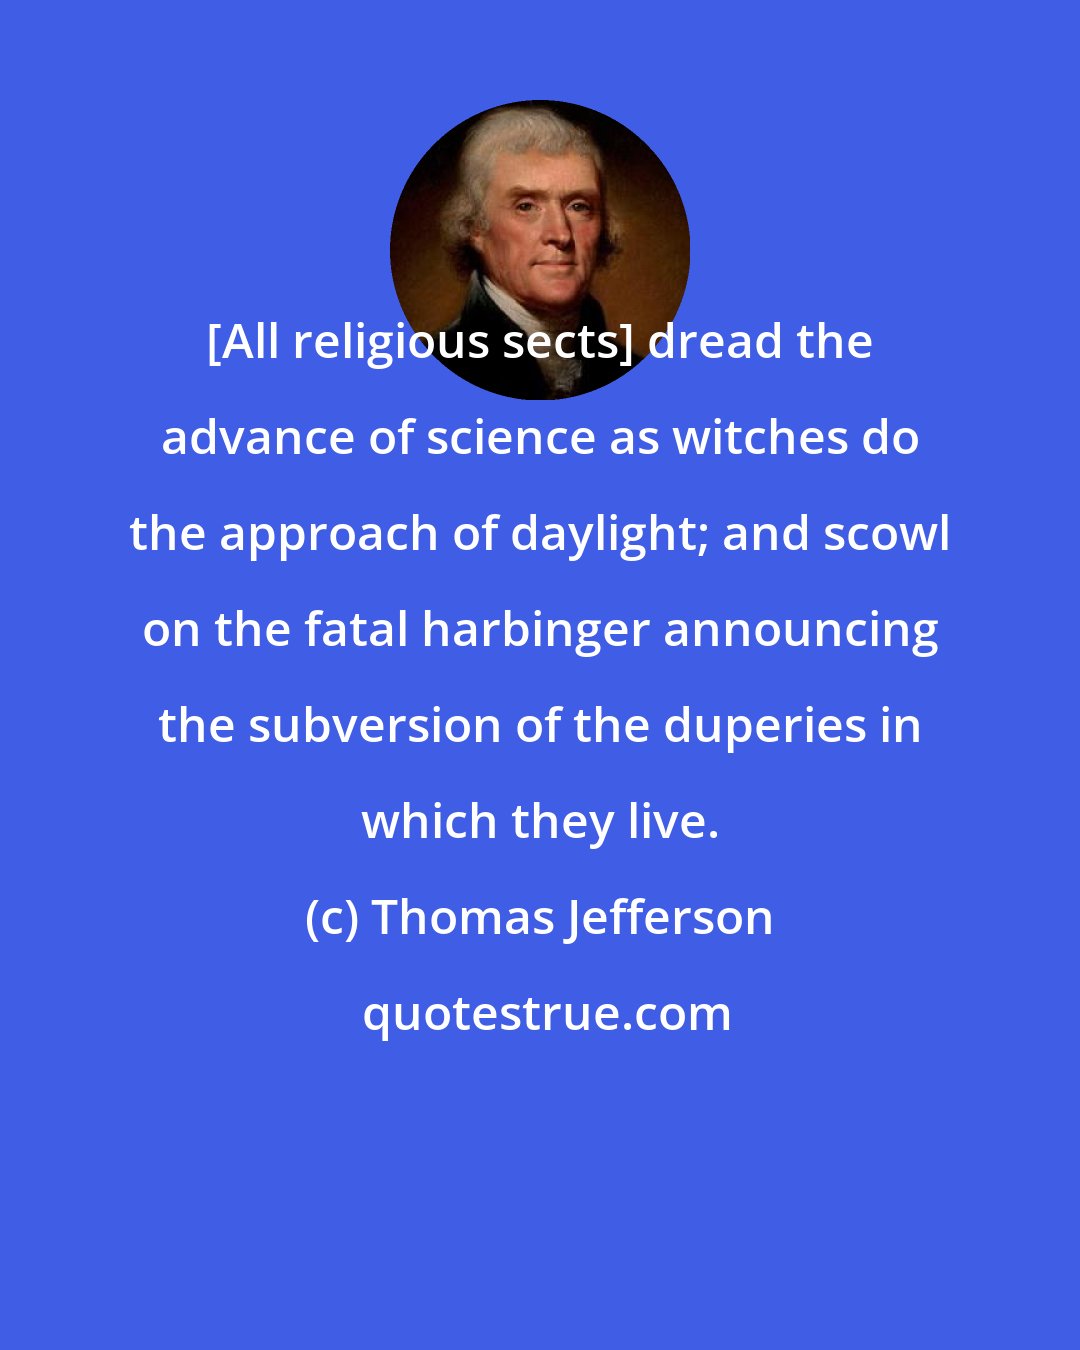 Thomas Jefferson: [All religious sects] dread the advance of science as witches do the approach of daylight; and scowl on the fatal harbinger announcing the subversion of the duperies in which they live.